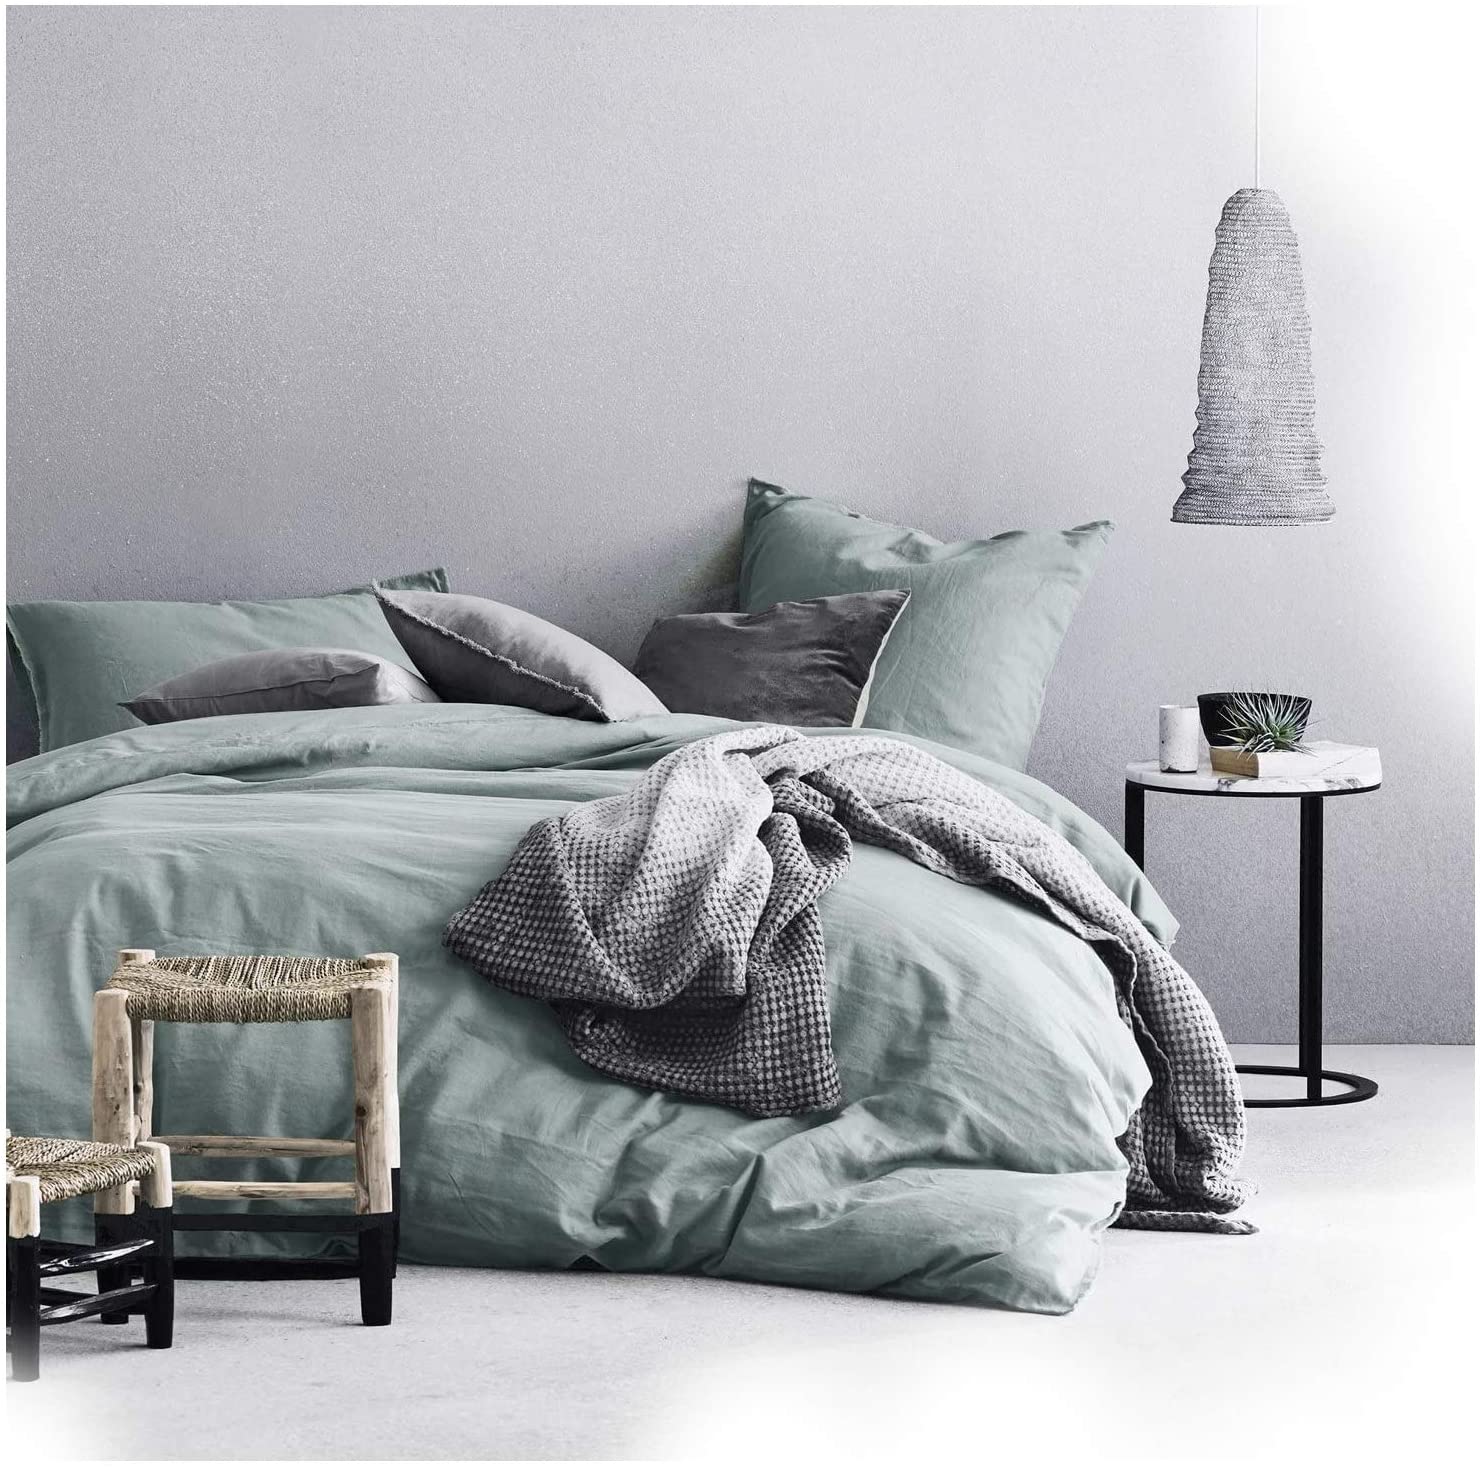 Price:$98.80  Washed Cotton Chambray Duvet Cover Solid Color Casual Modern Style Bedding Set Relaxed Soft Feel Natural Wrinkled Look (King, Eucalyptus Mint) : Home & Kitchen